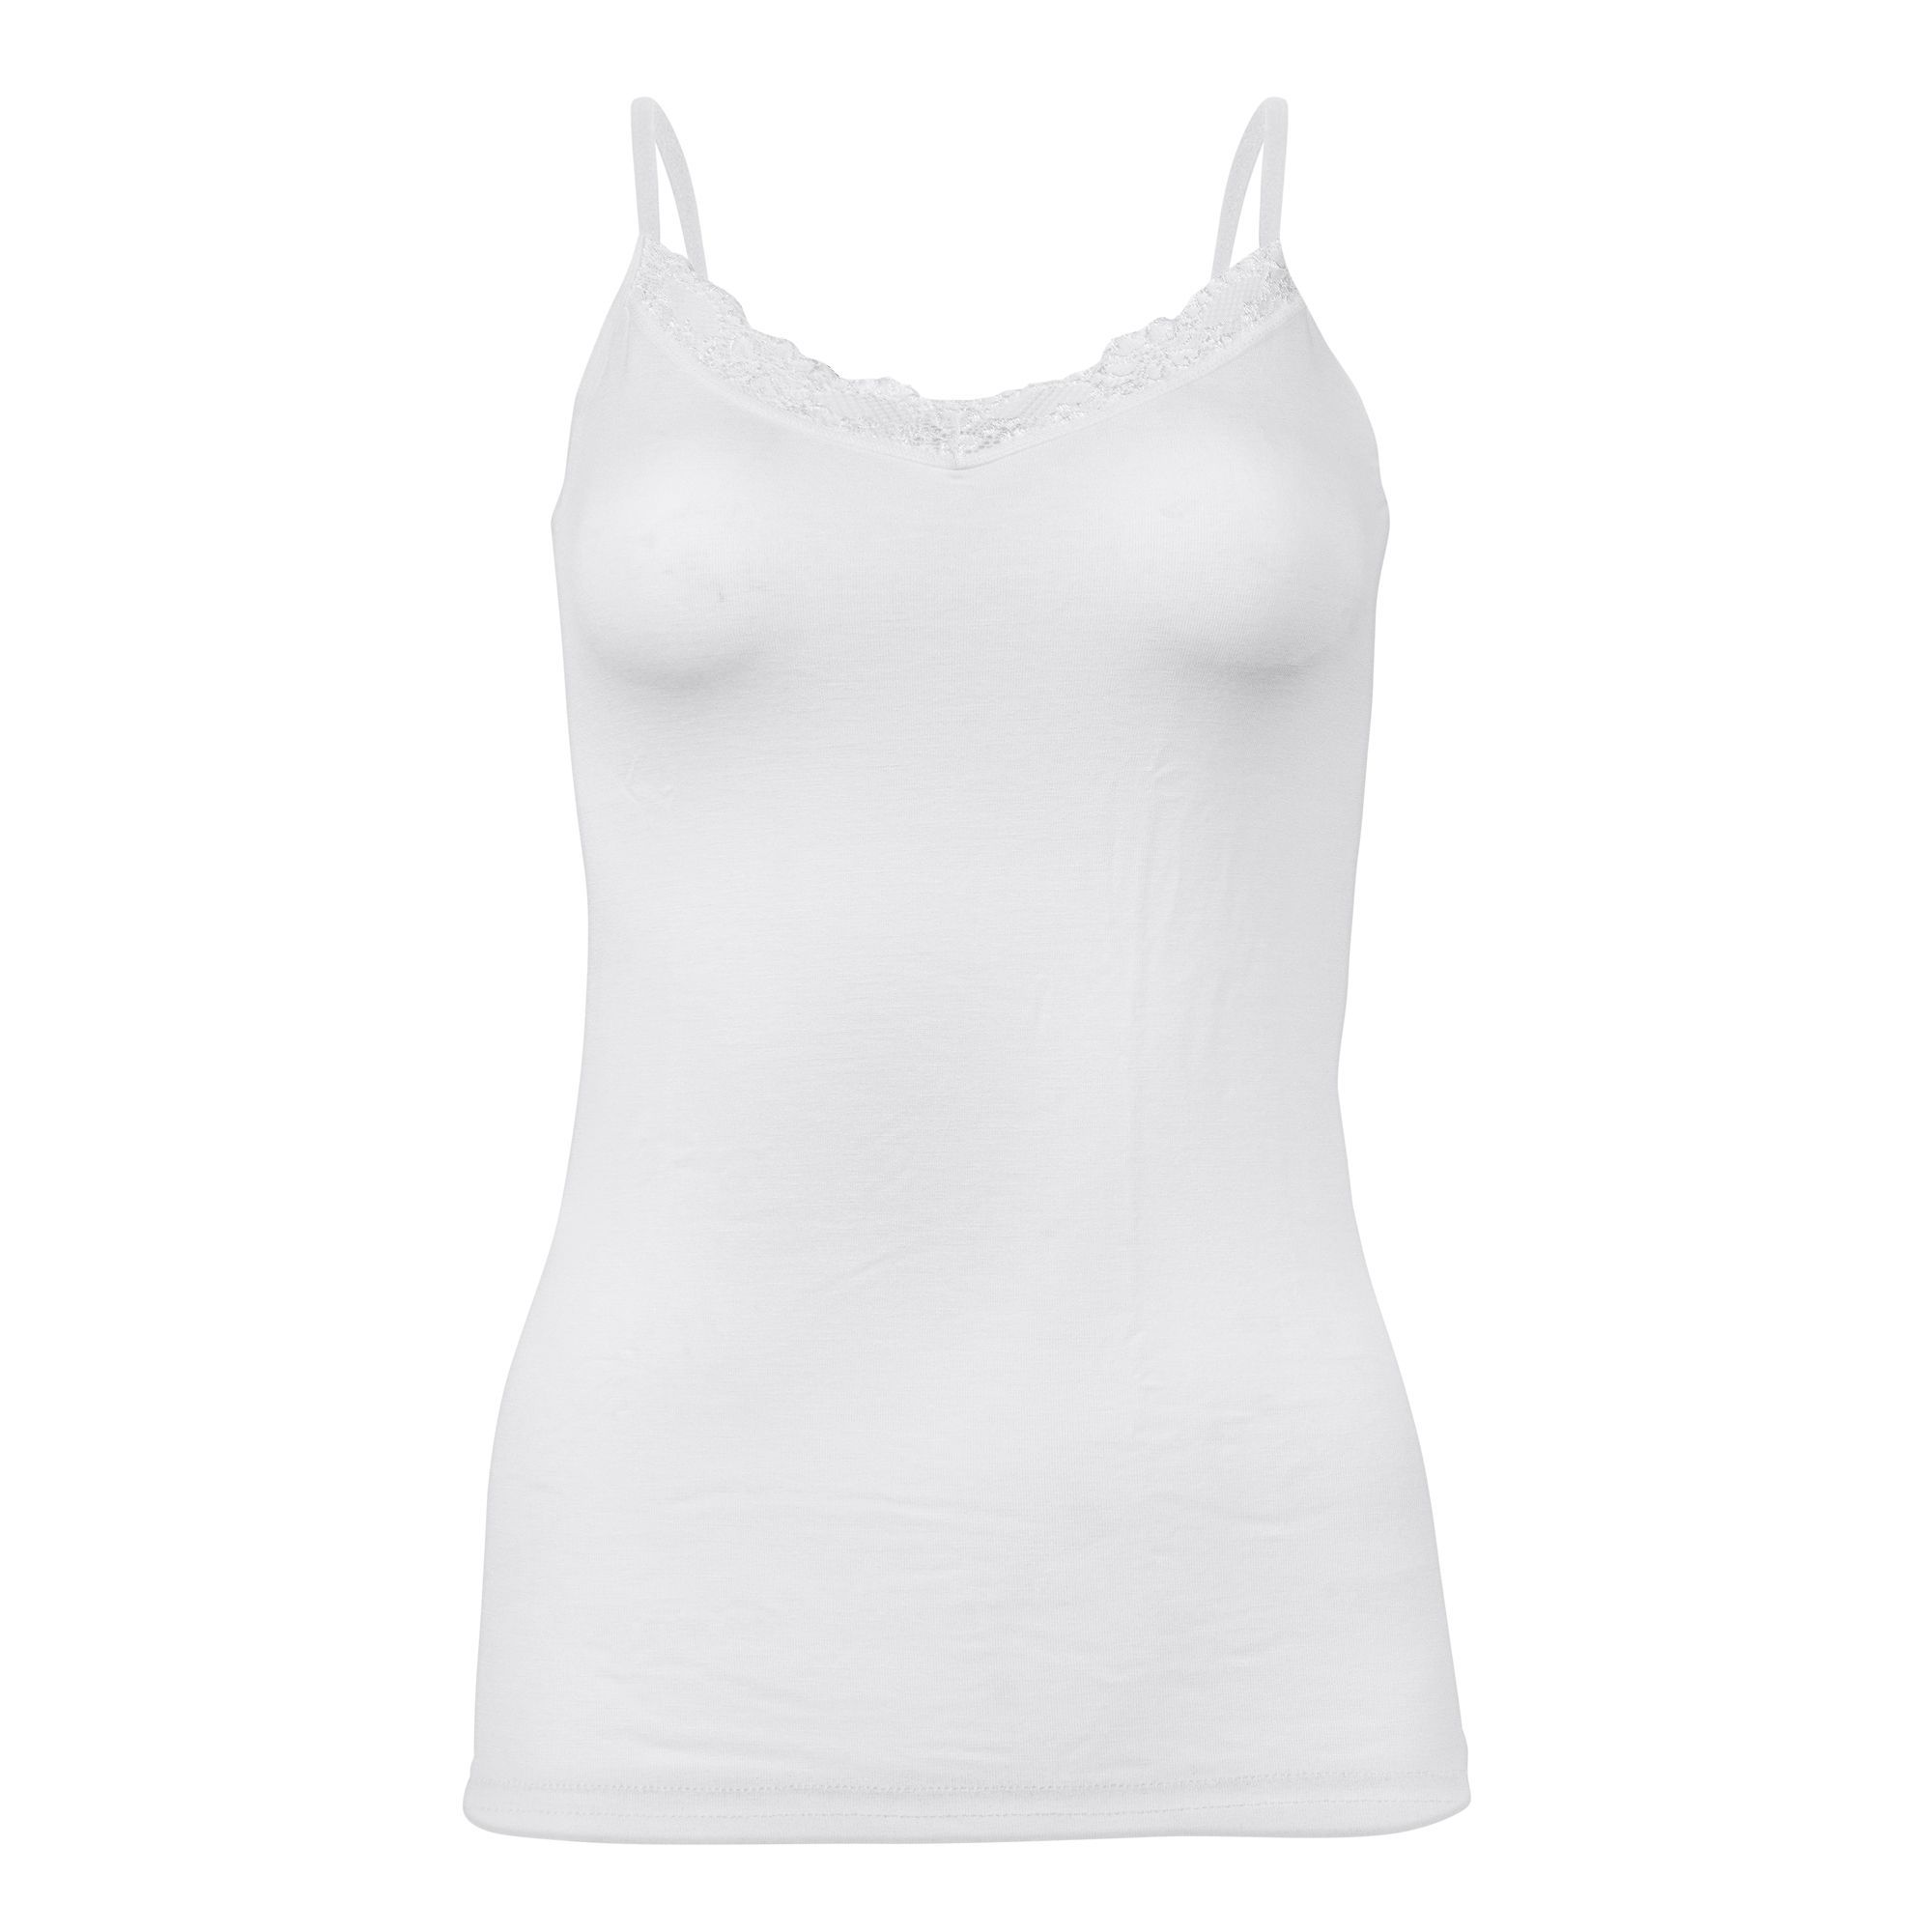 Purchase Q-EN Bamboo Camisole White 705 Online at Special Price in ...